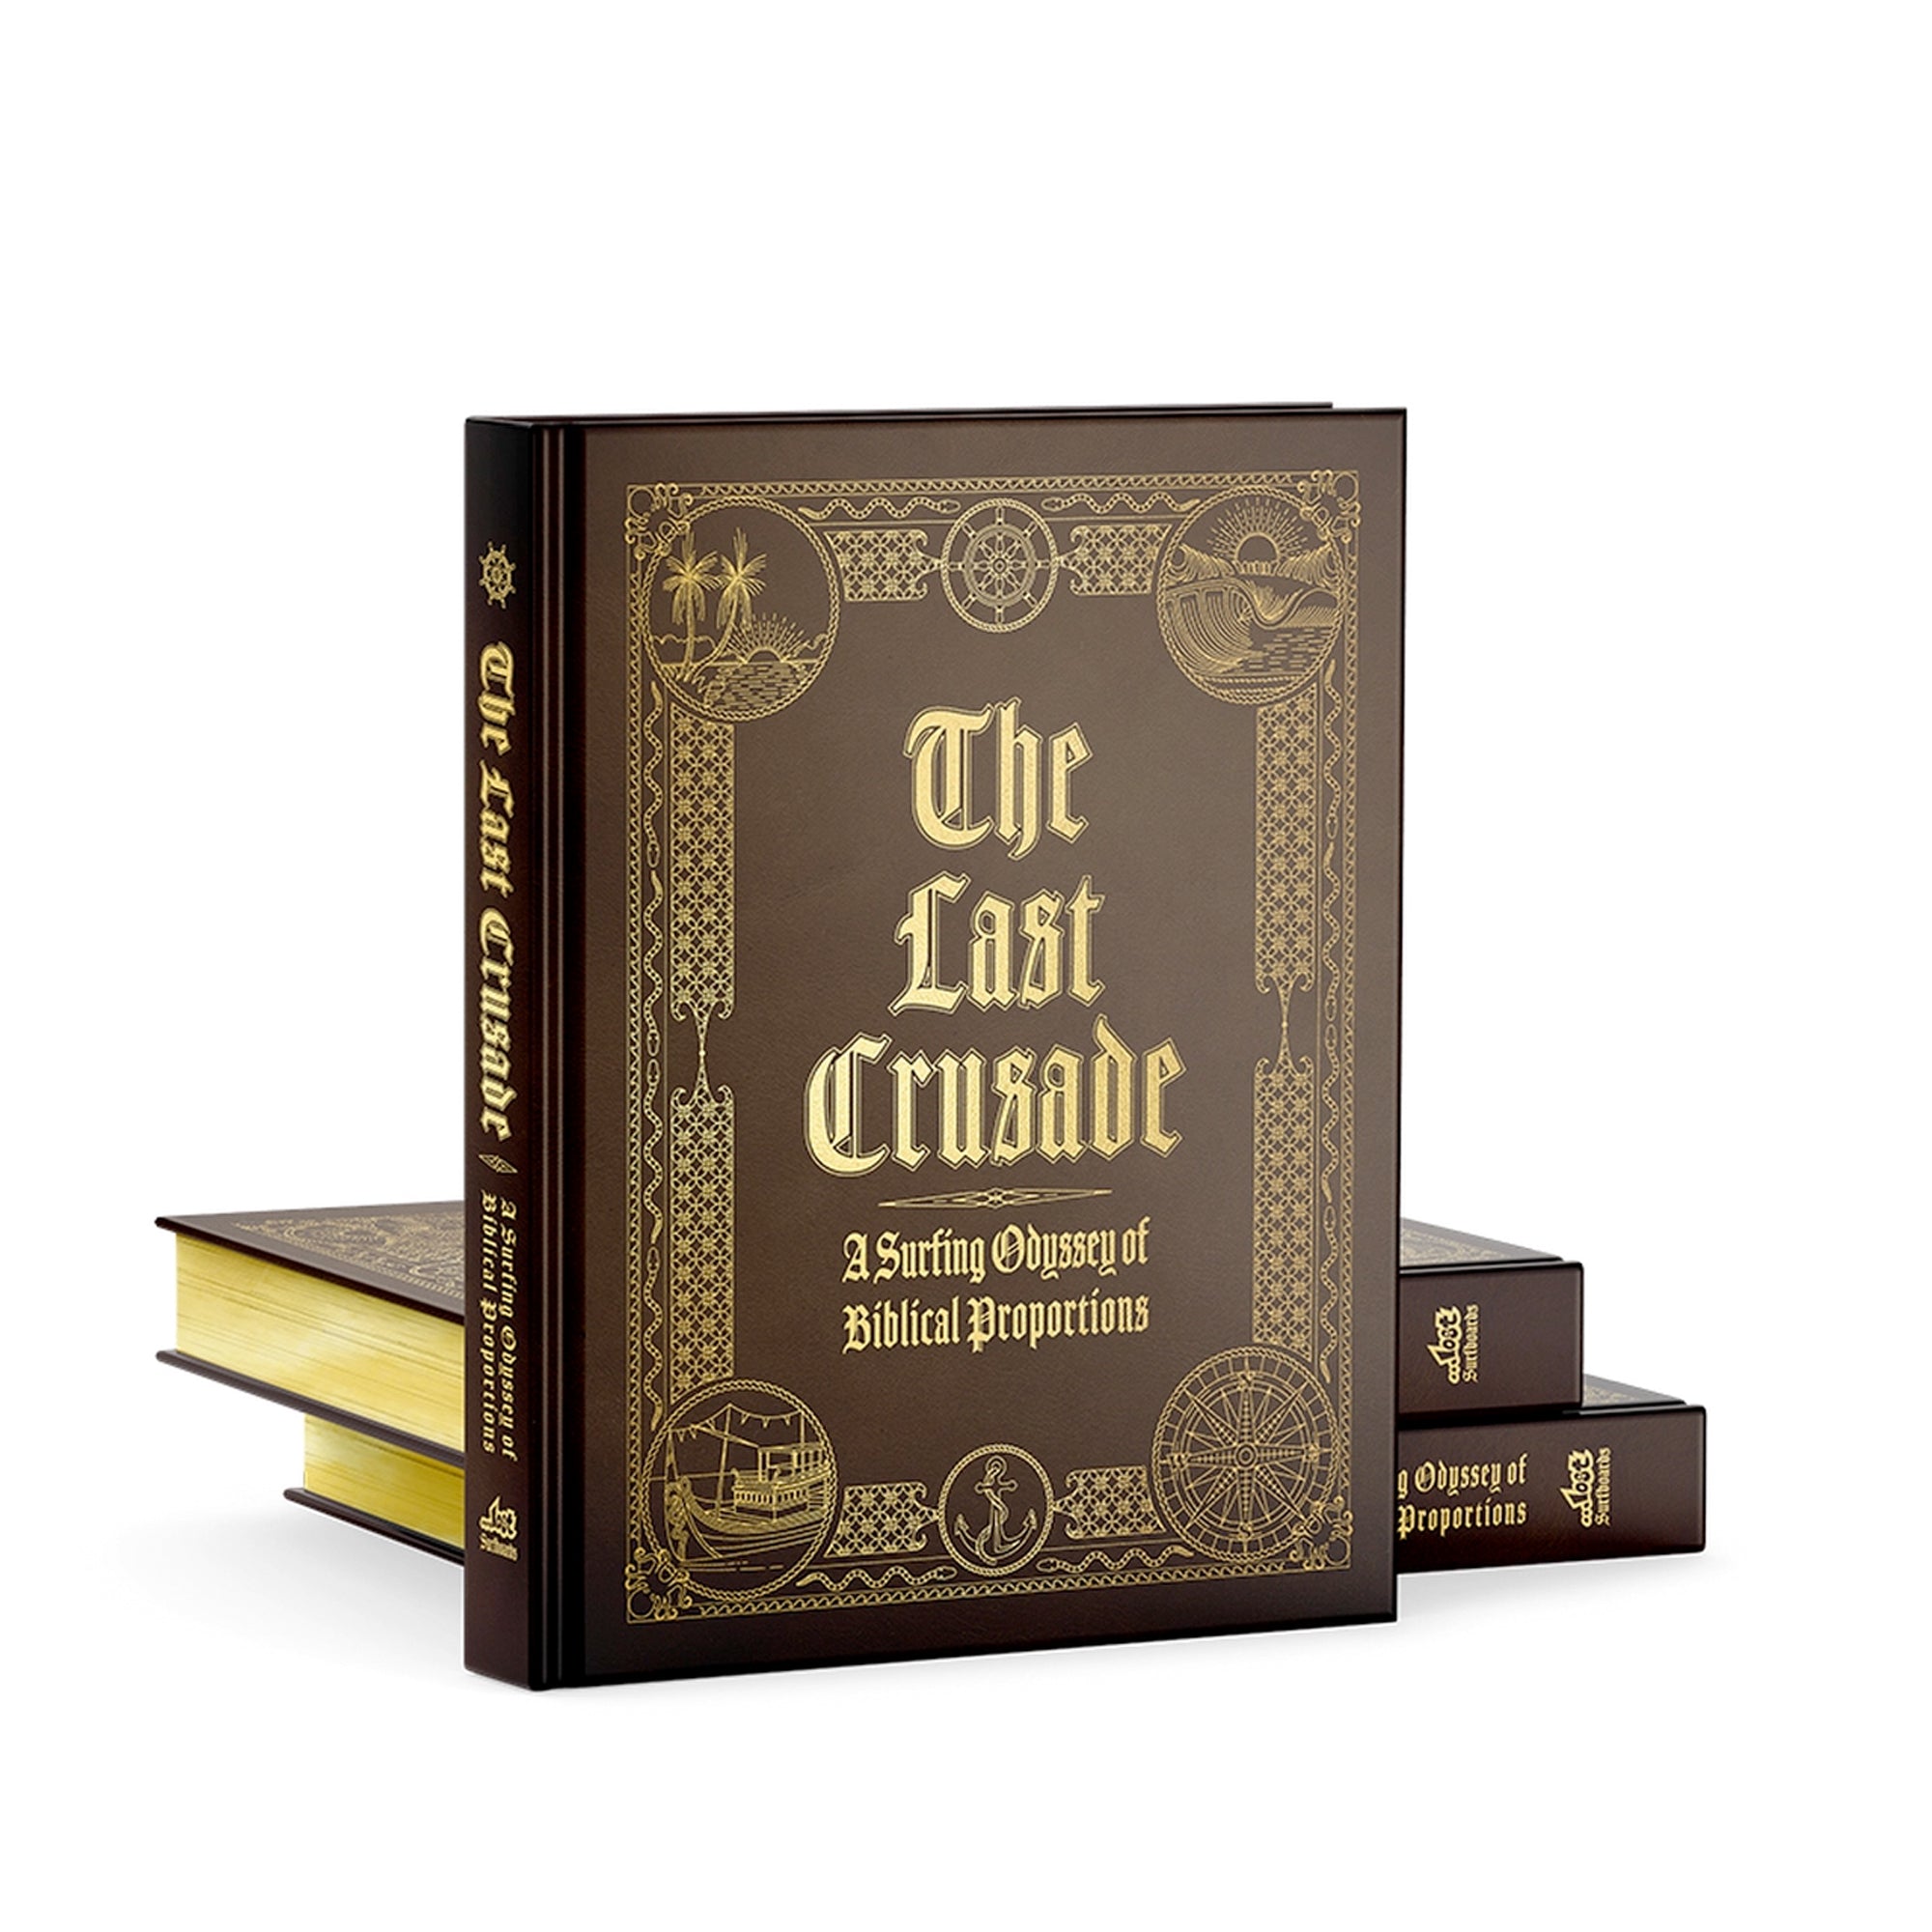 The Last Crusade: A Surfing Odyssey of Biblical Proportions